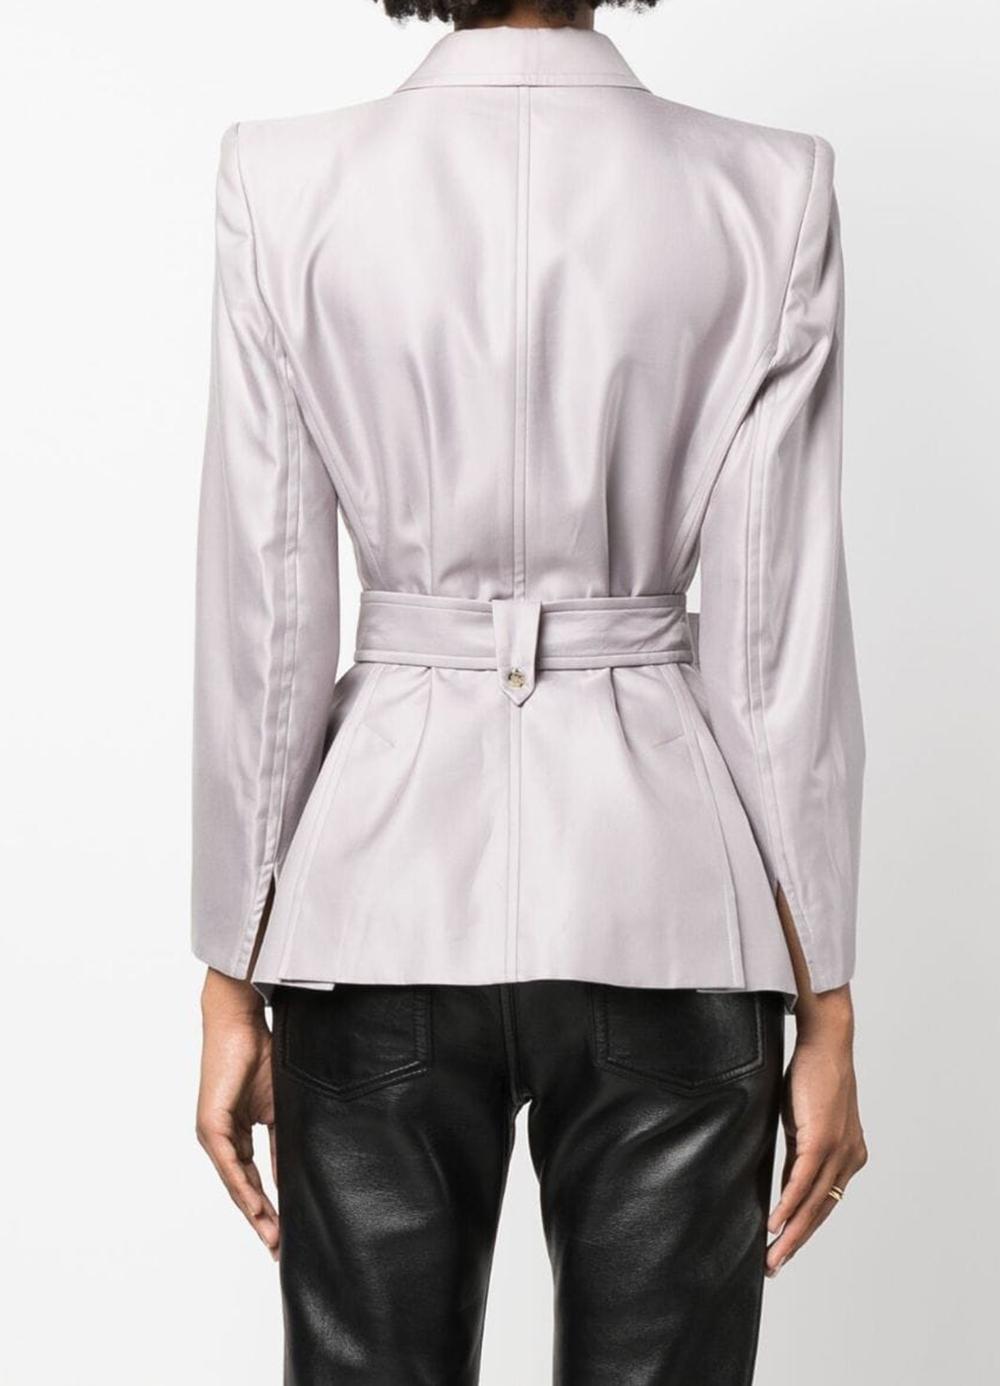 Women's Yves Saint Laurent by Tom Ford Satin Lilac Blazer For Sale